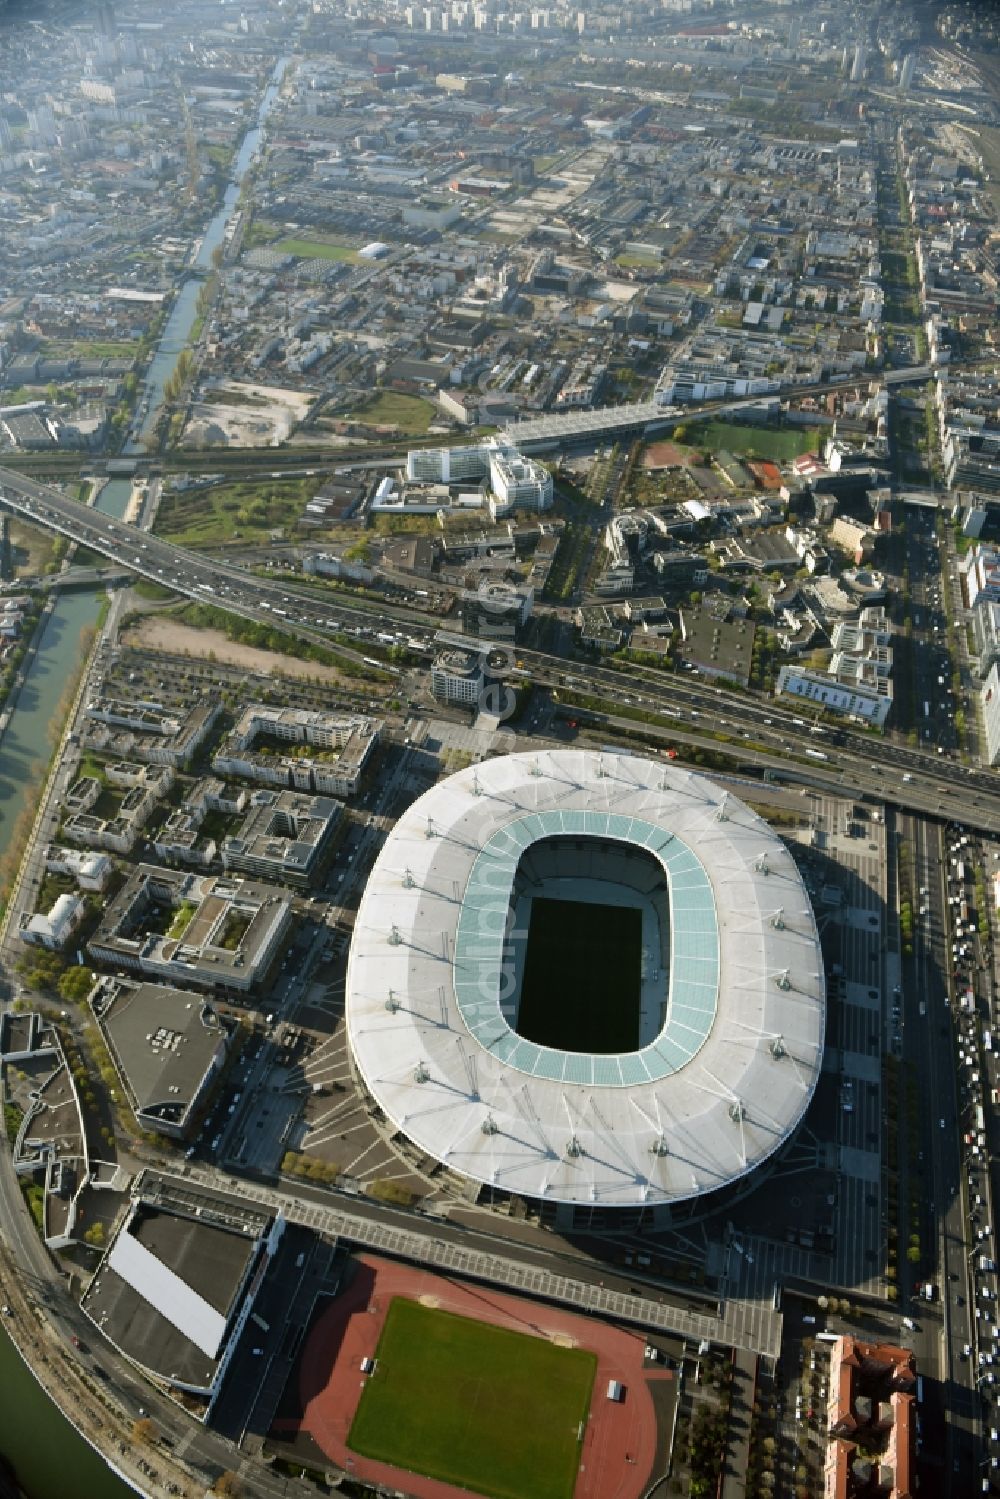 Paris Saint-Denis from the bird's eye view: Sports facility grounds of the arena of the Stade de France before the European Football Championship Euro 2016 in Paris -Saint-Denis in Ile-de-France, France